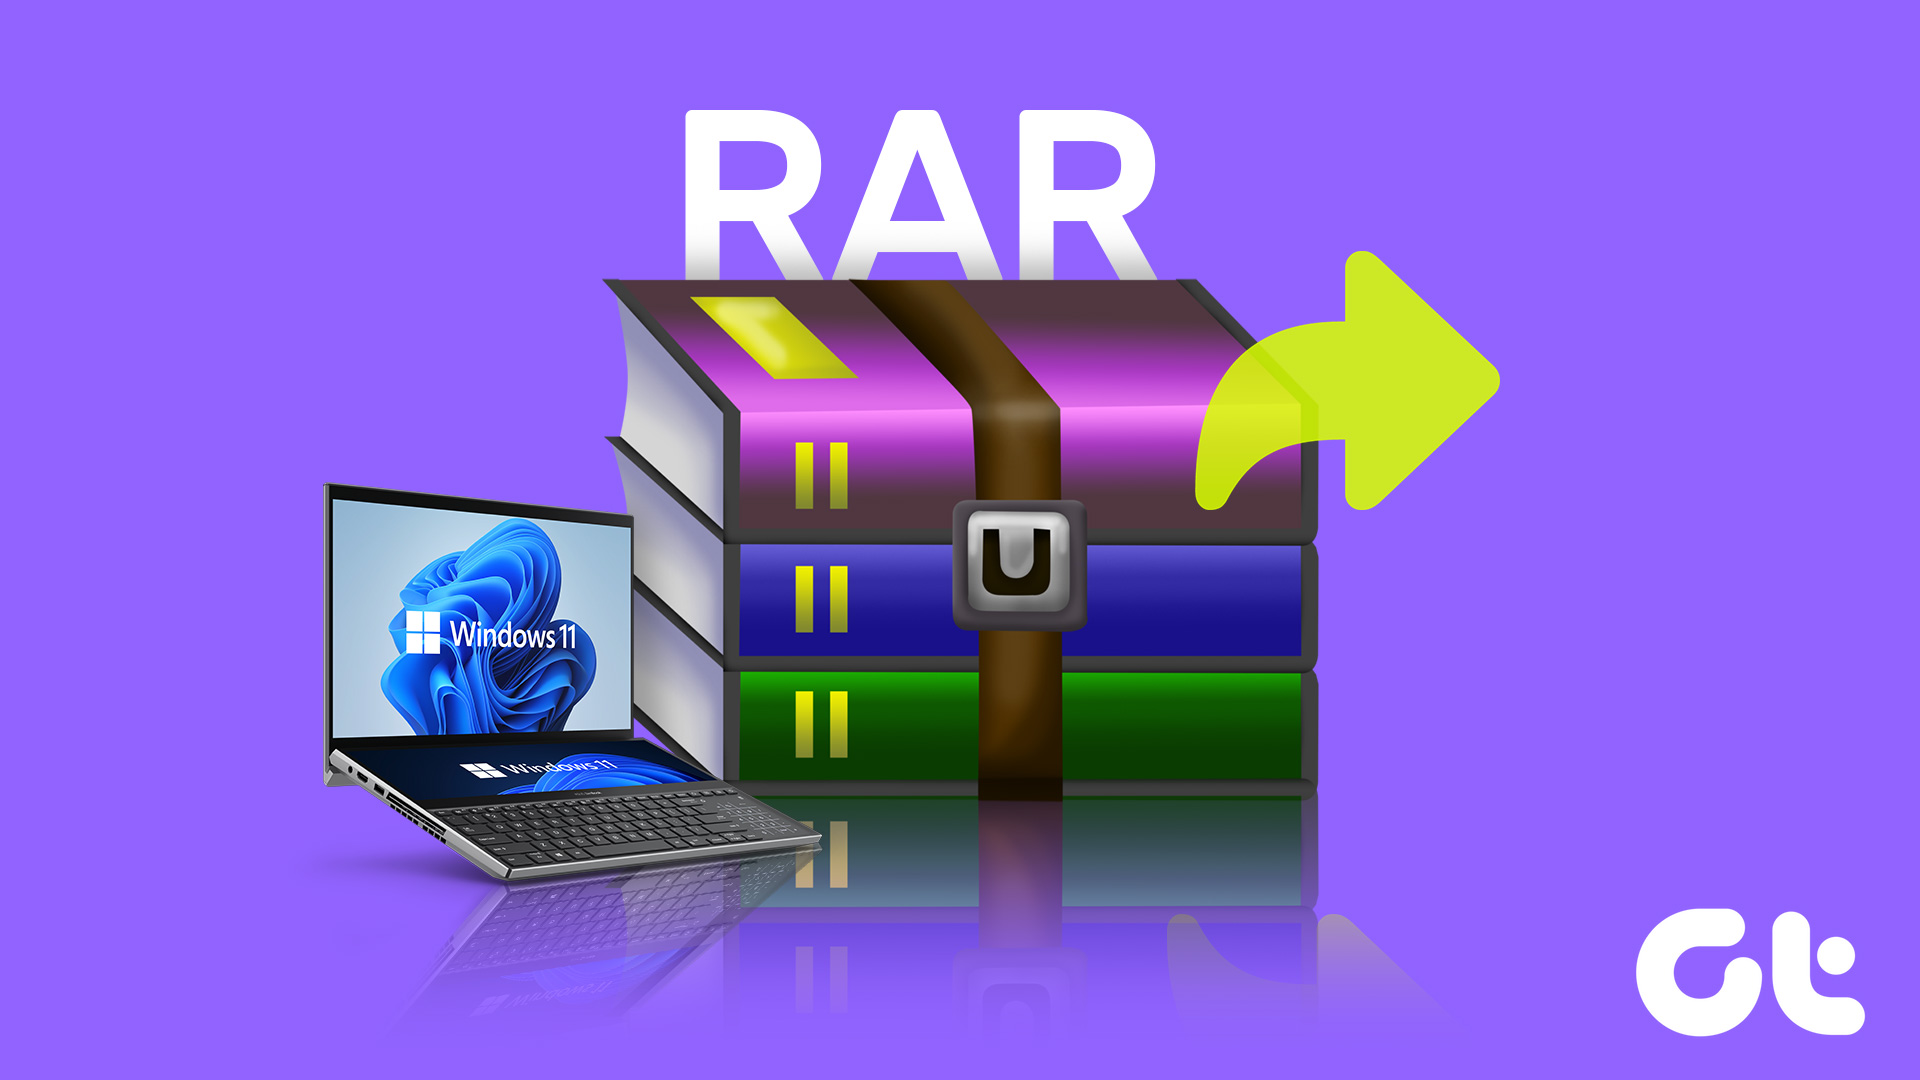 5 Best Tools To Extract Rar Files On Windows 11 - Guiding Tech